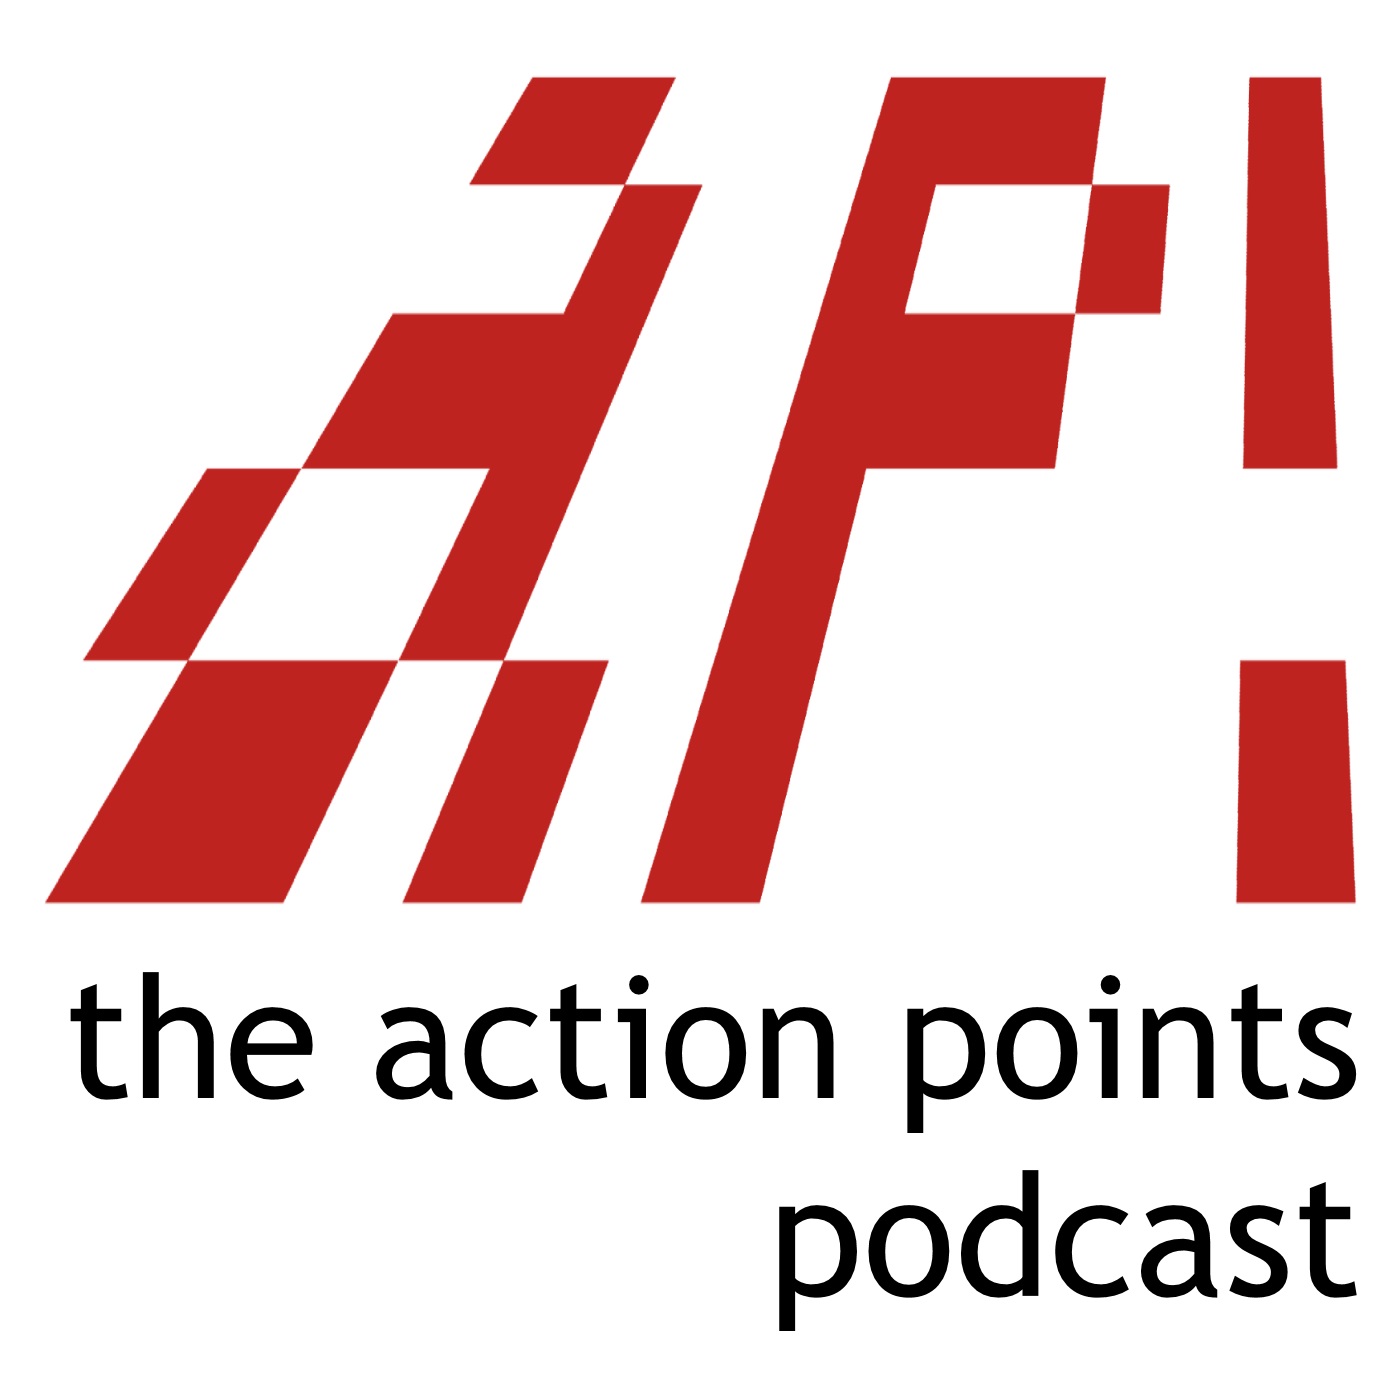 The Action Points Podcast